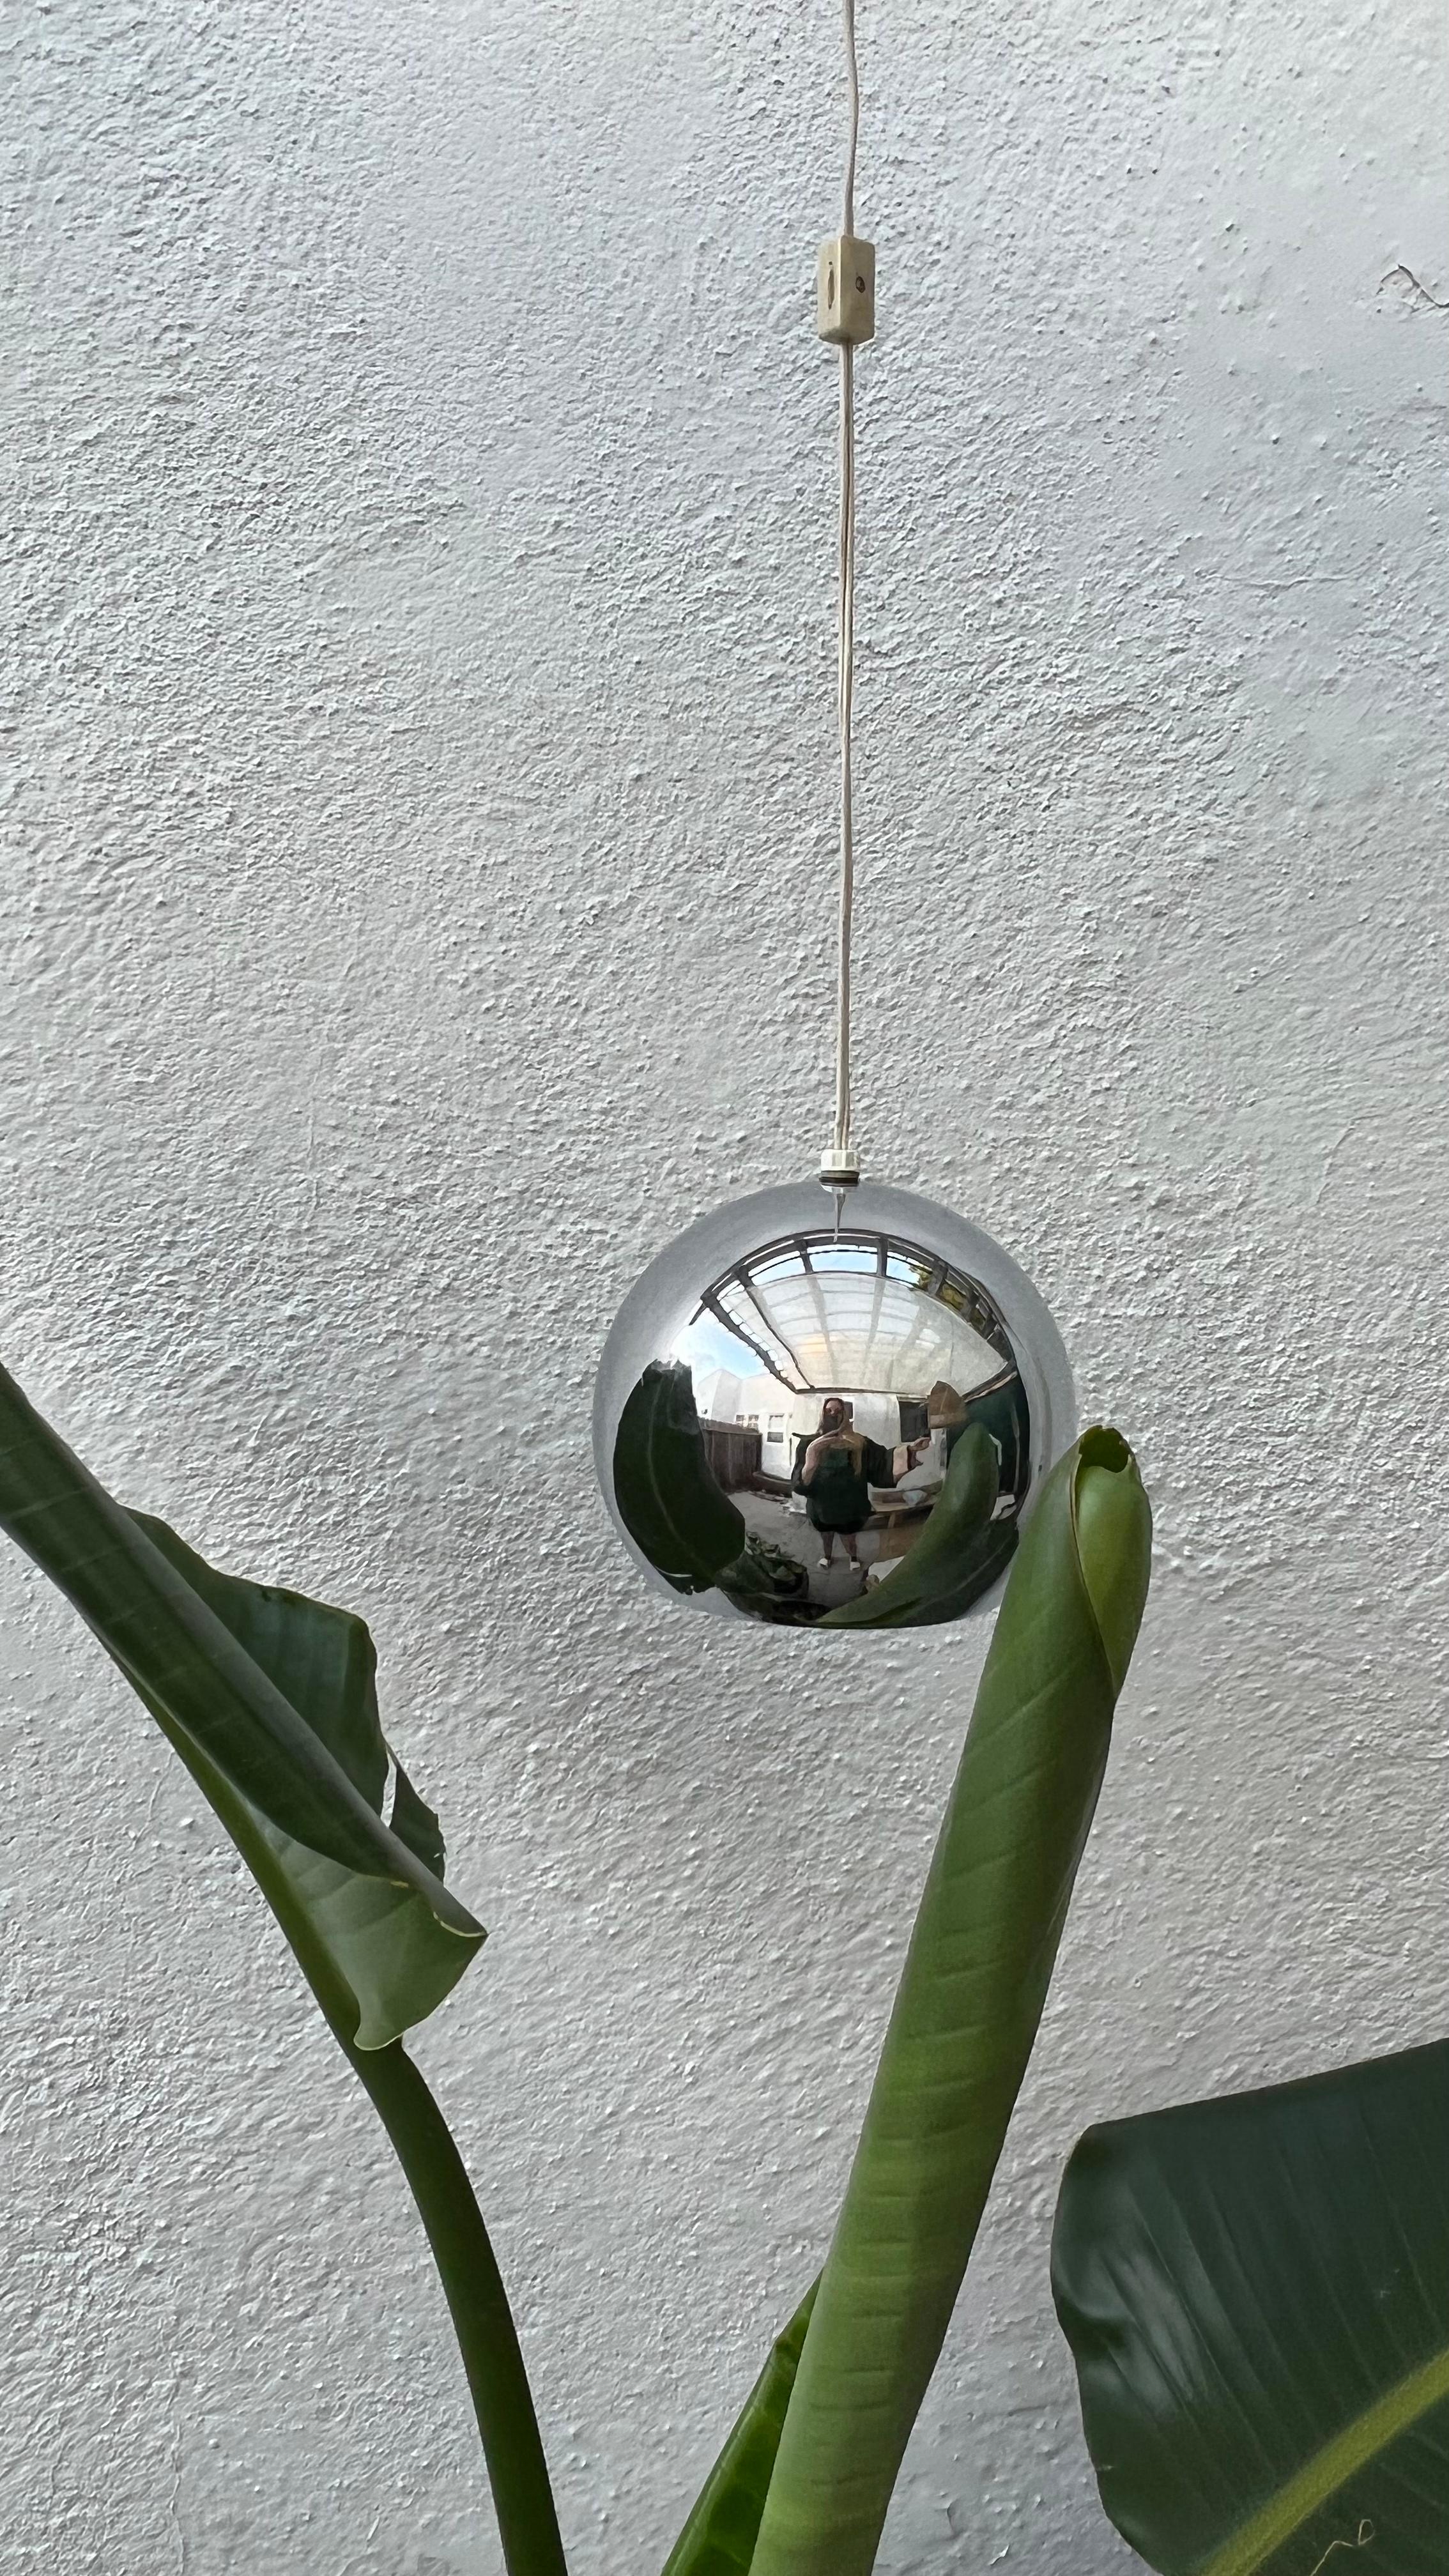 A modernist 1960s round chrome pendant by Robert Sonneman. This pendant plugs into the wall and has a cord switch to turn it on and off. Since this pendant doesn't require hardwiring, you can move it any time you feel like rearranging your space.